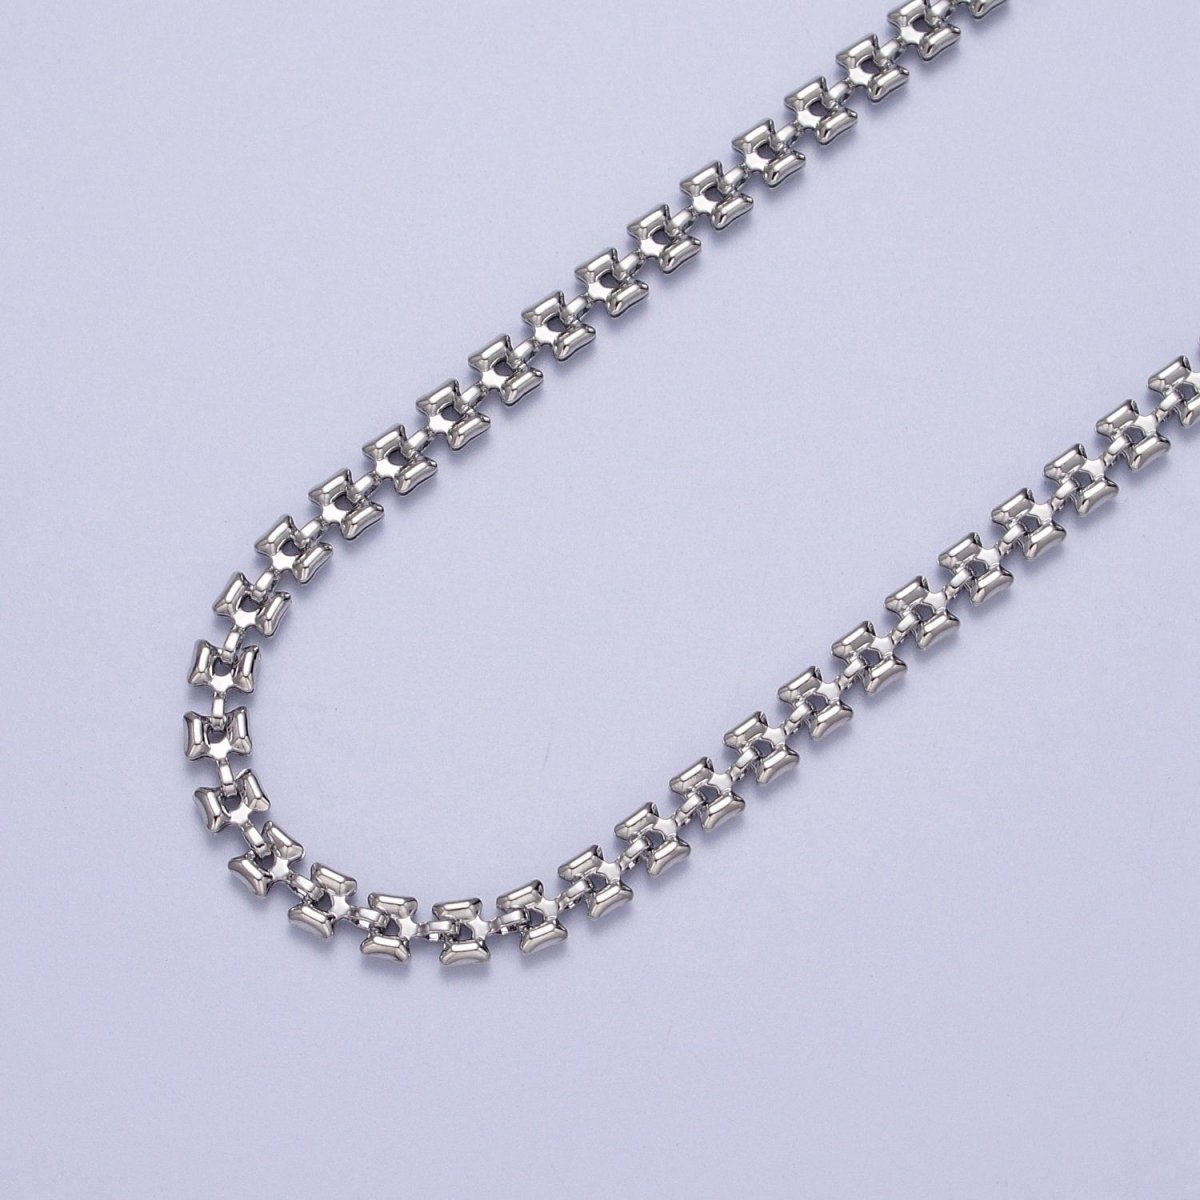 24K Gold Filled 4.2mm Designed Boxy Gold, Silver Unfinished Chain | ROLL-879, ROLL-880 Clearance Pricing - DLUXCA